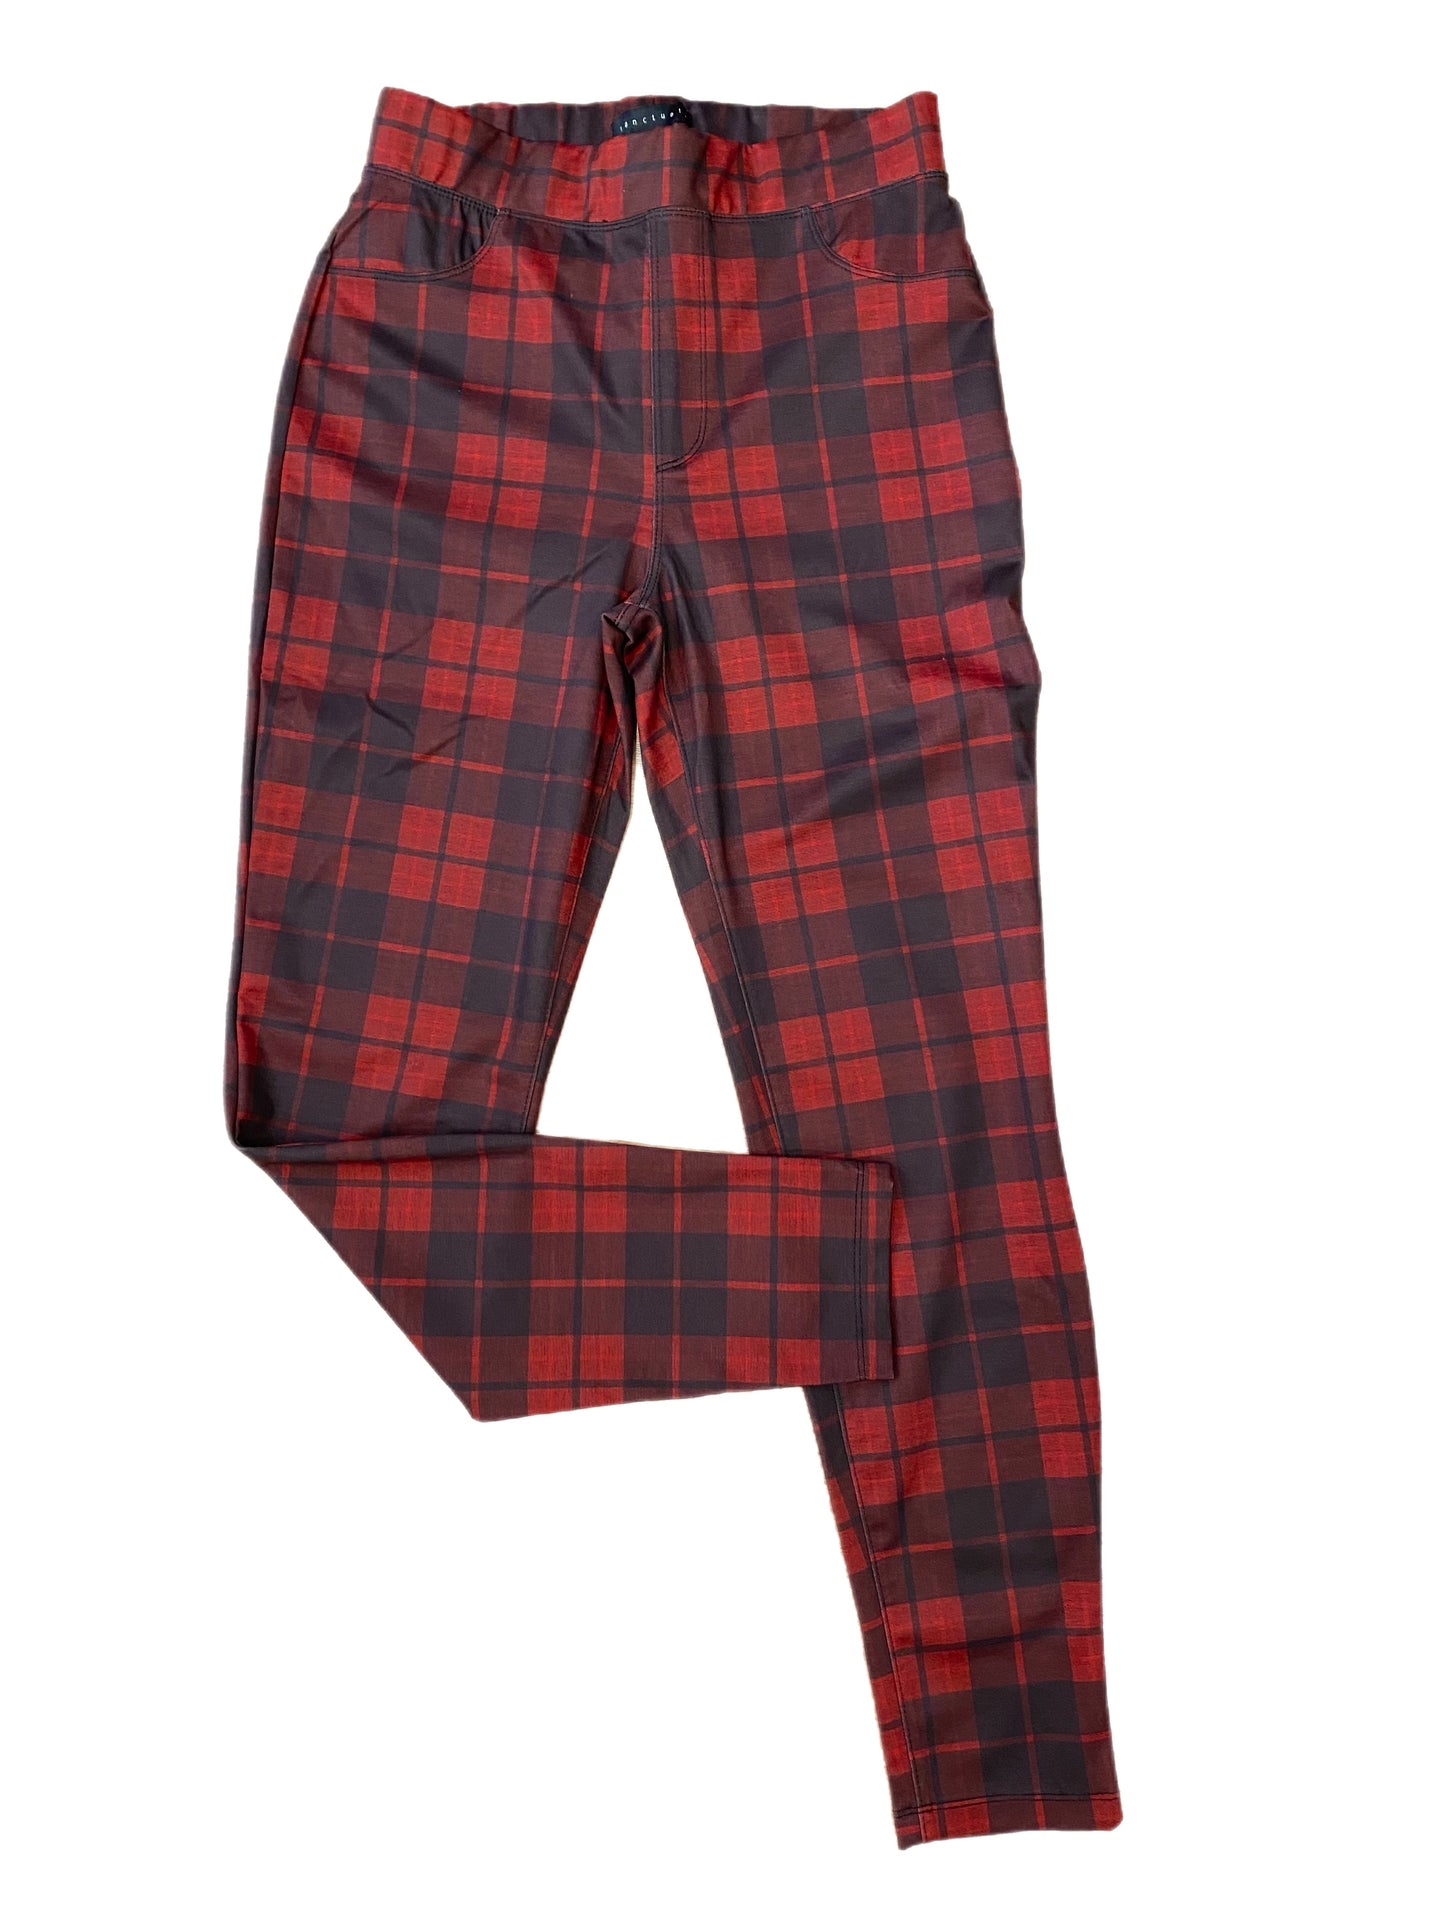 Runway Legging - Red Plaid Size Small